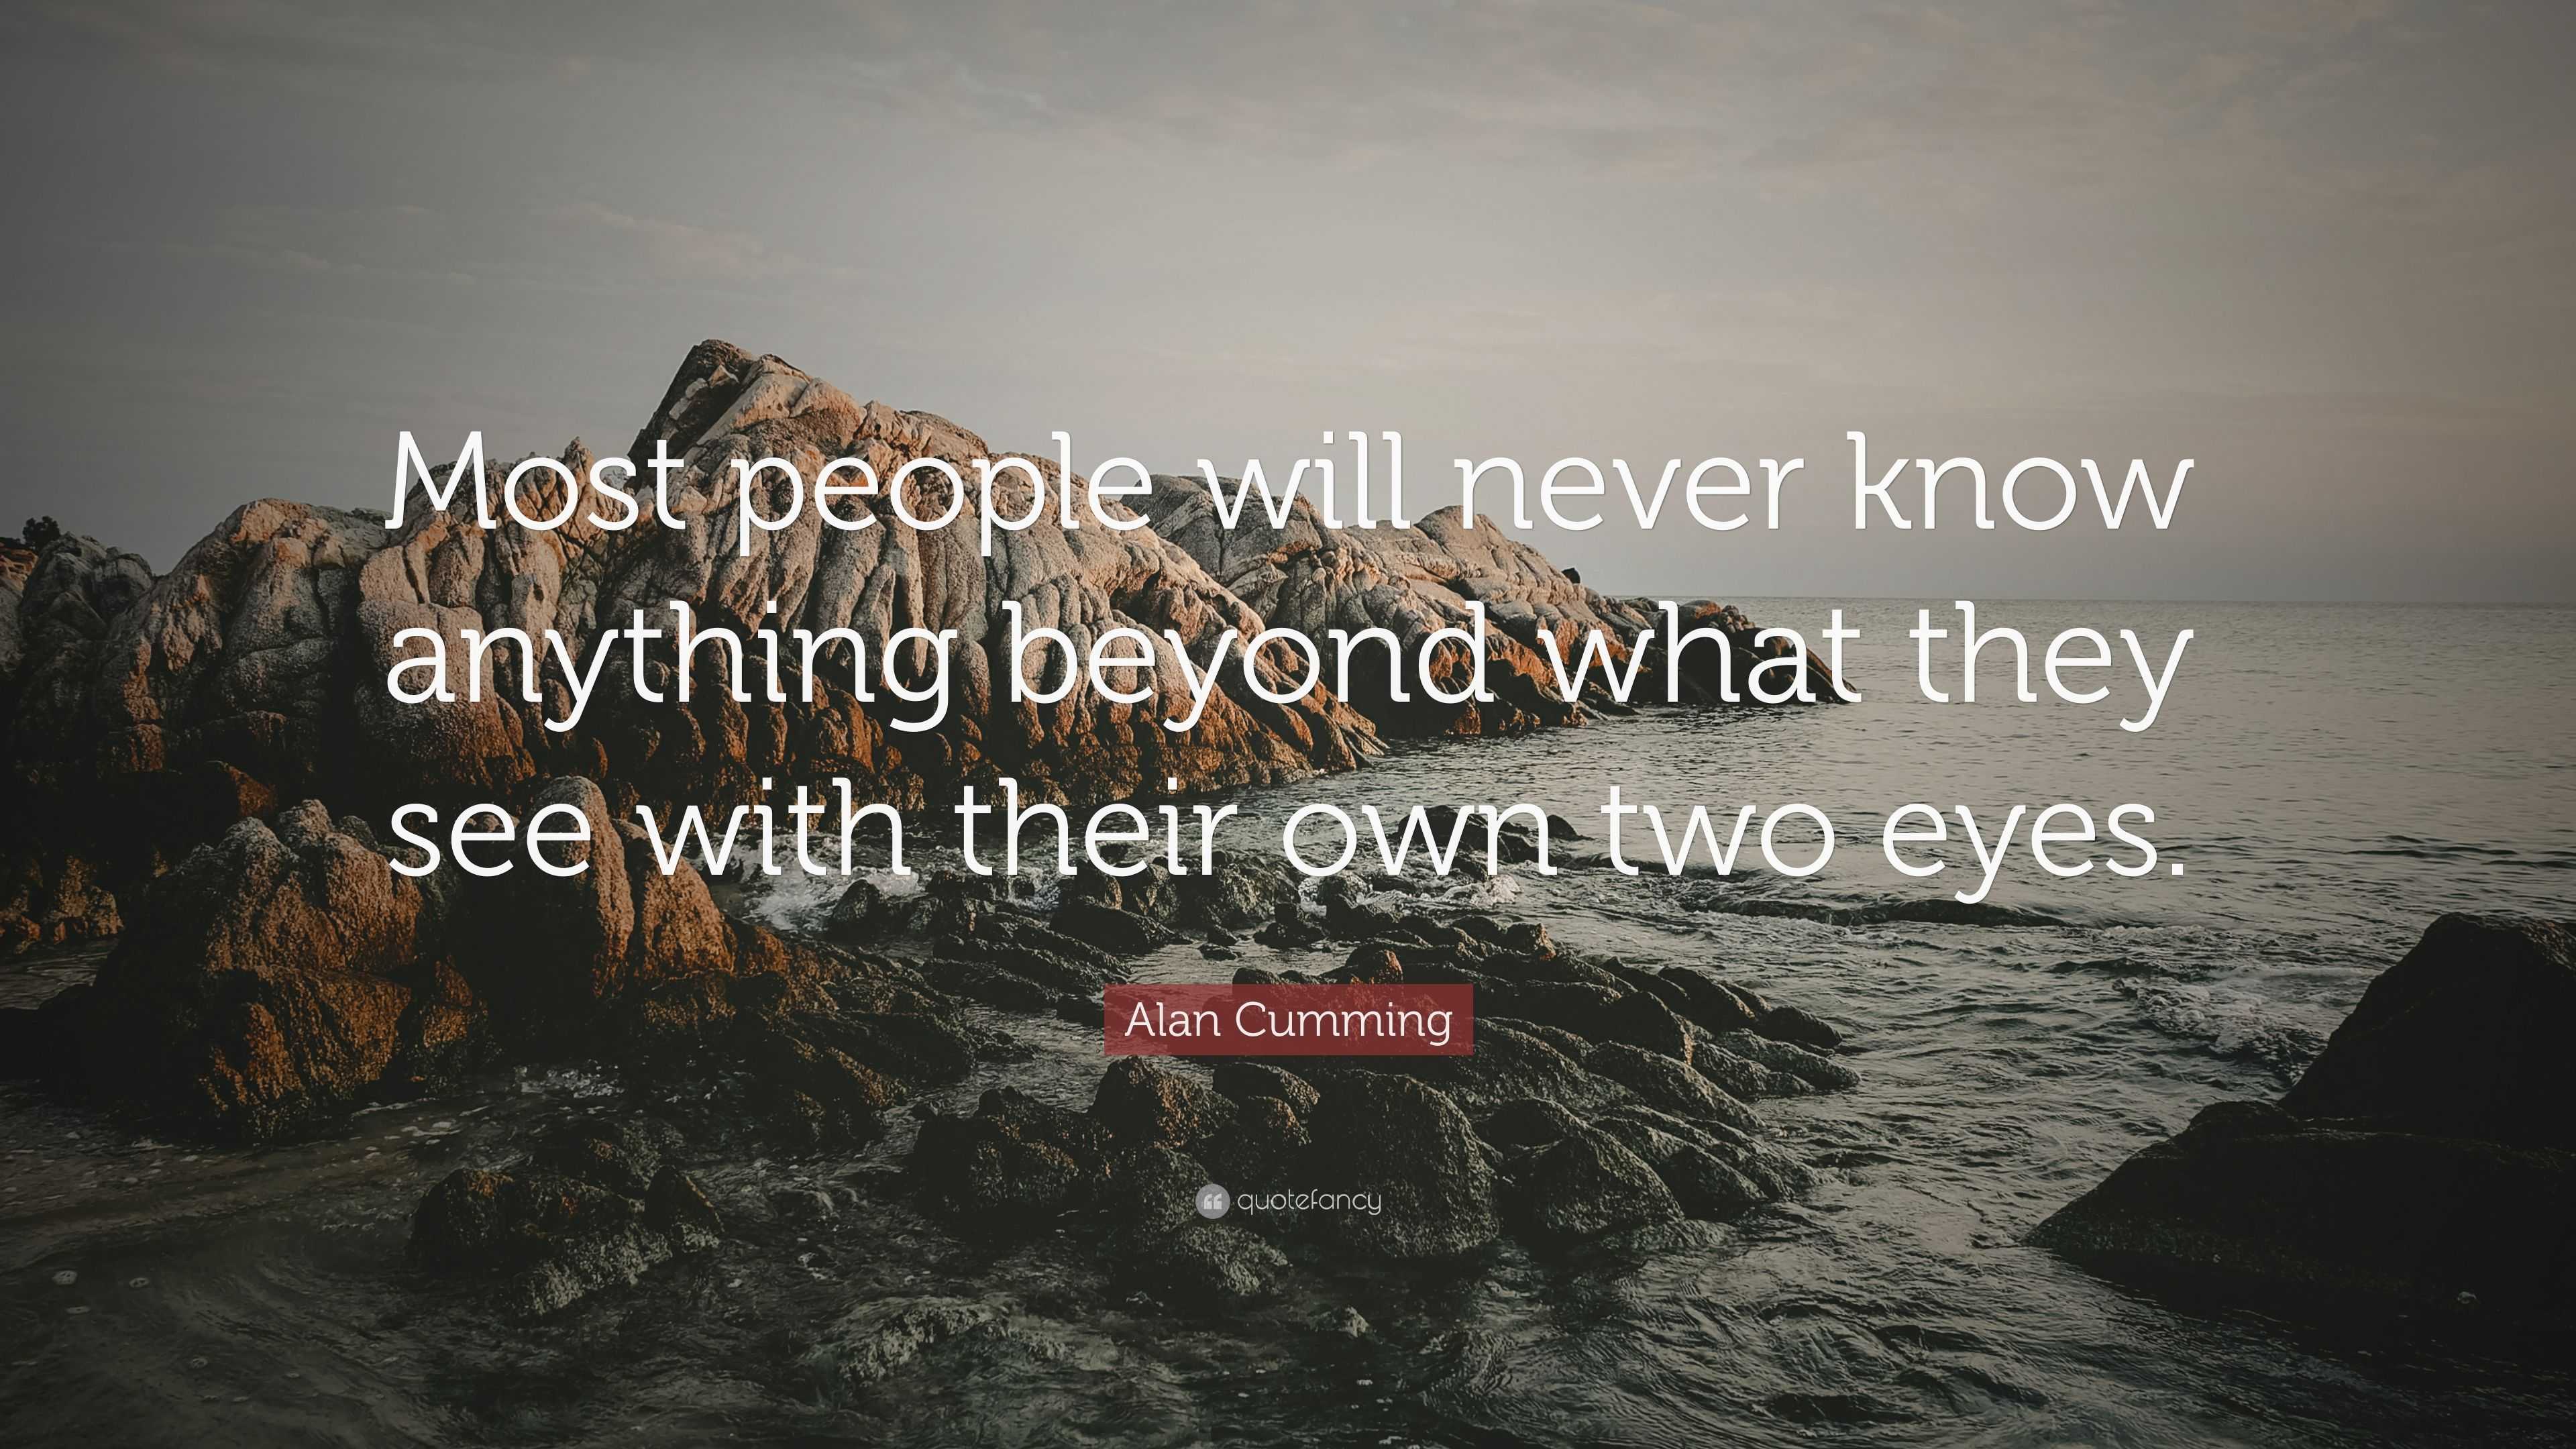 Alan Cumming Quote: “Most people will never know anything beyond what ...